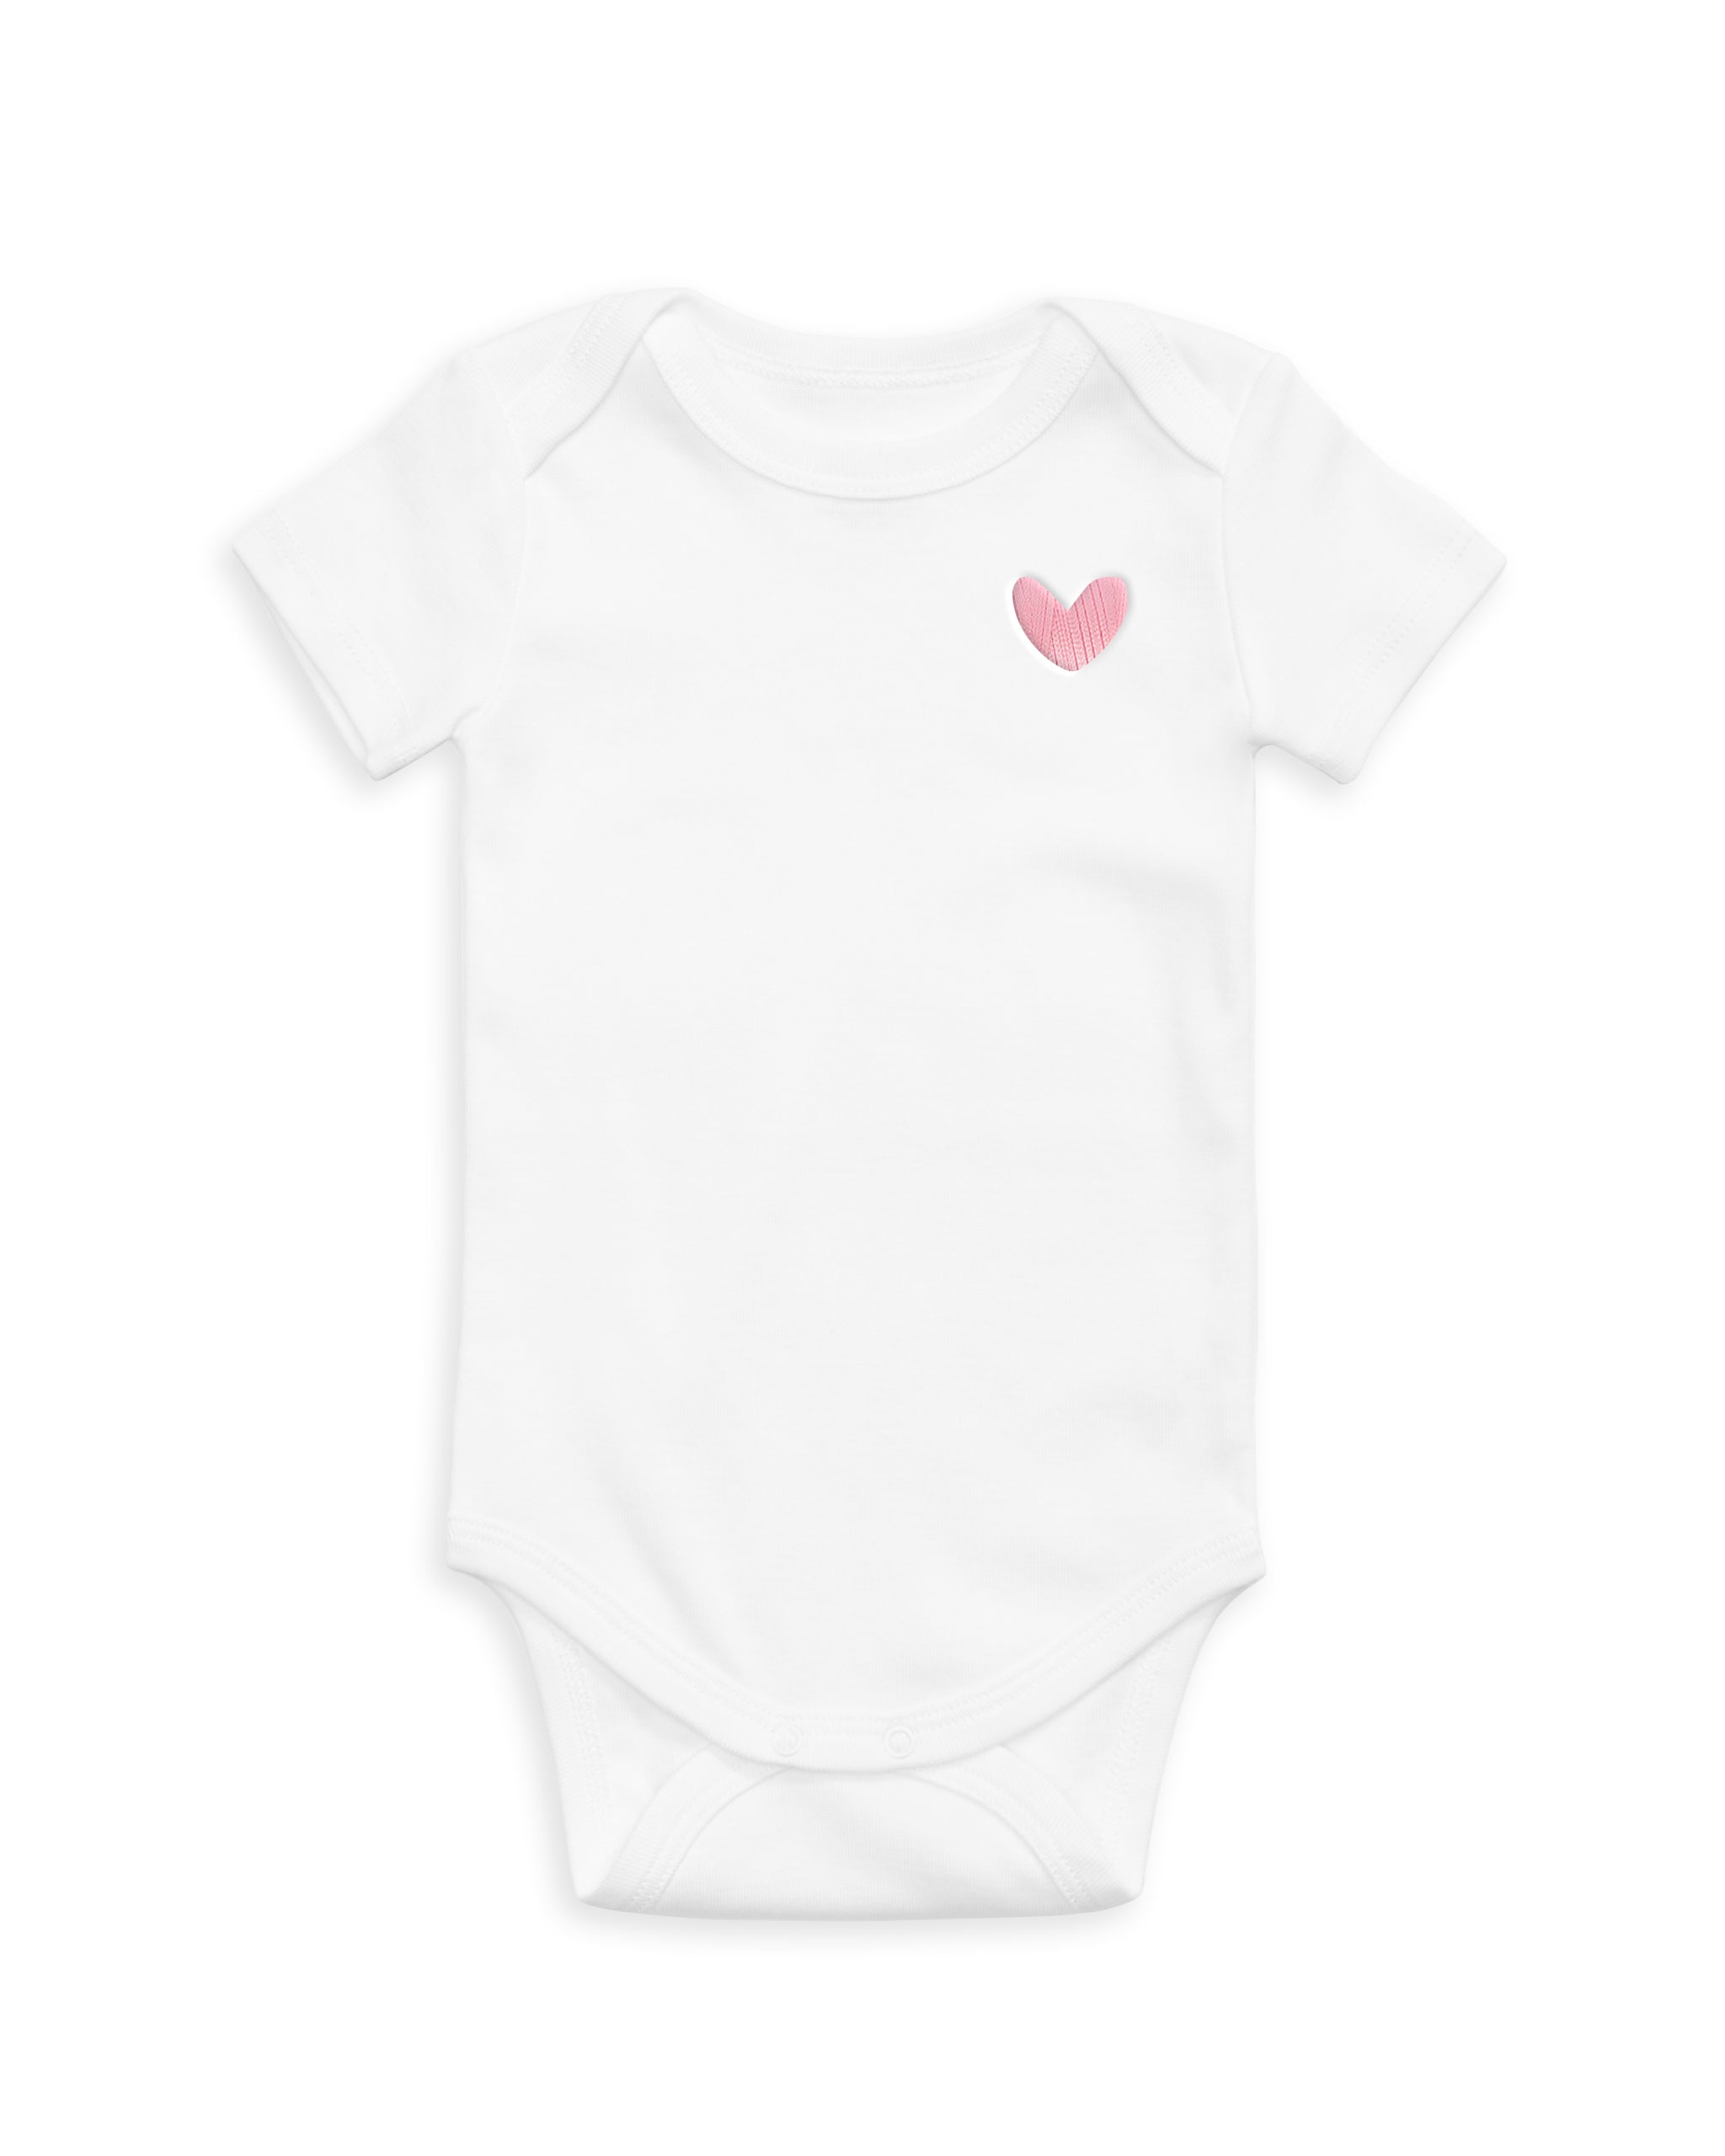 The Organic Embroidered Short Sleeve Onesie [White with Pink Heart]